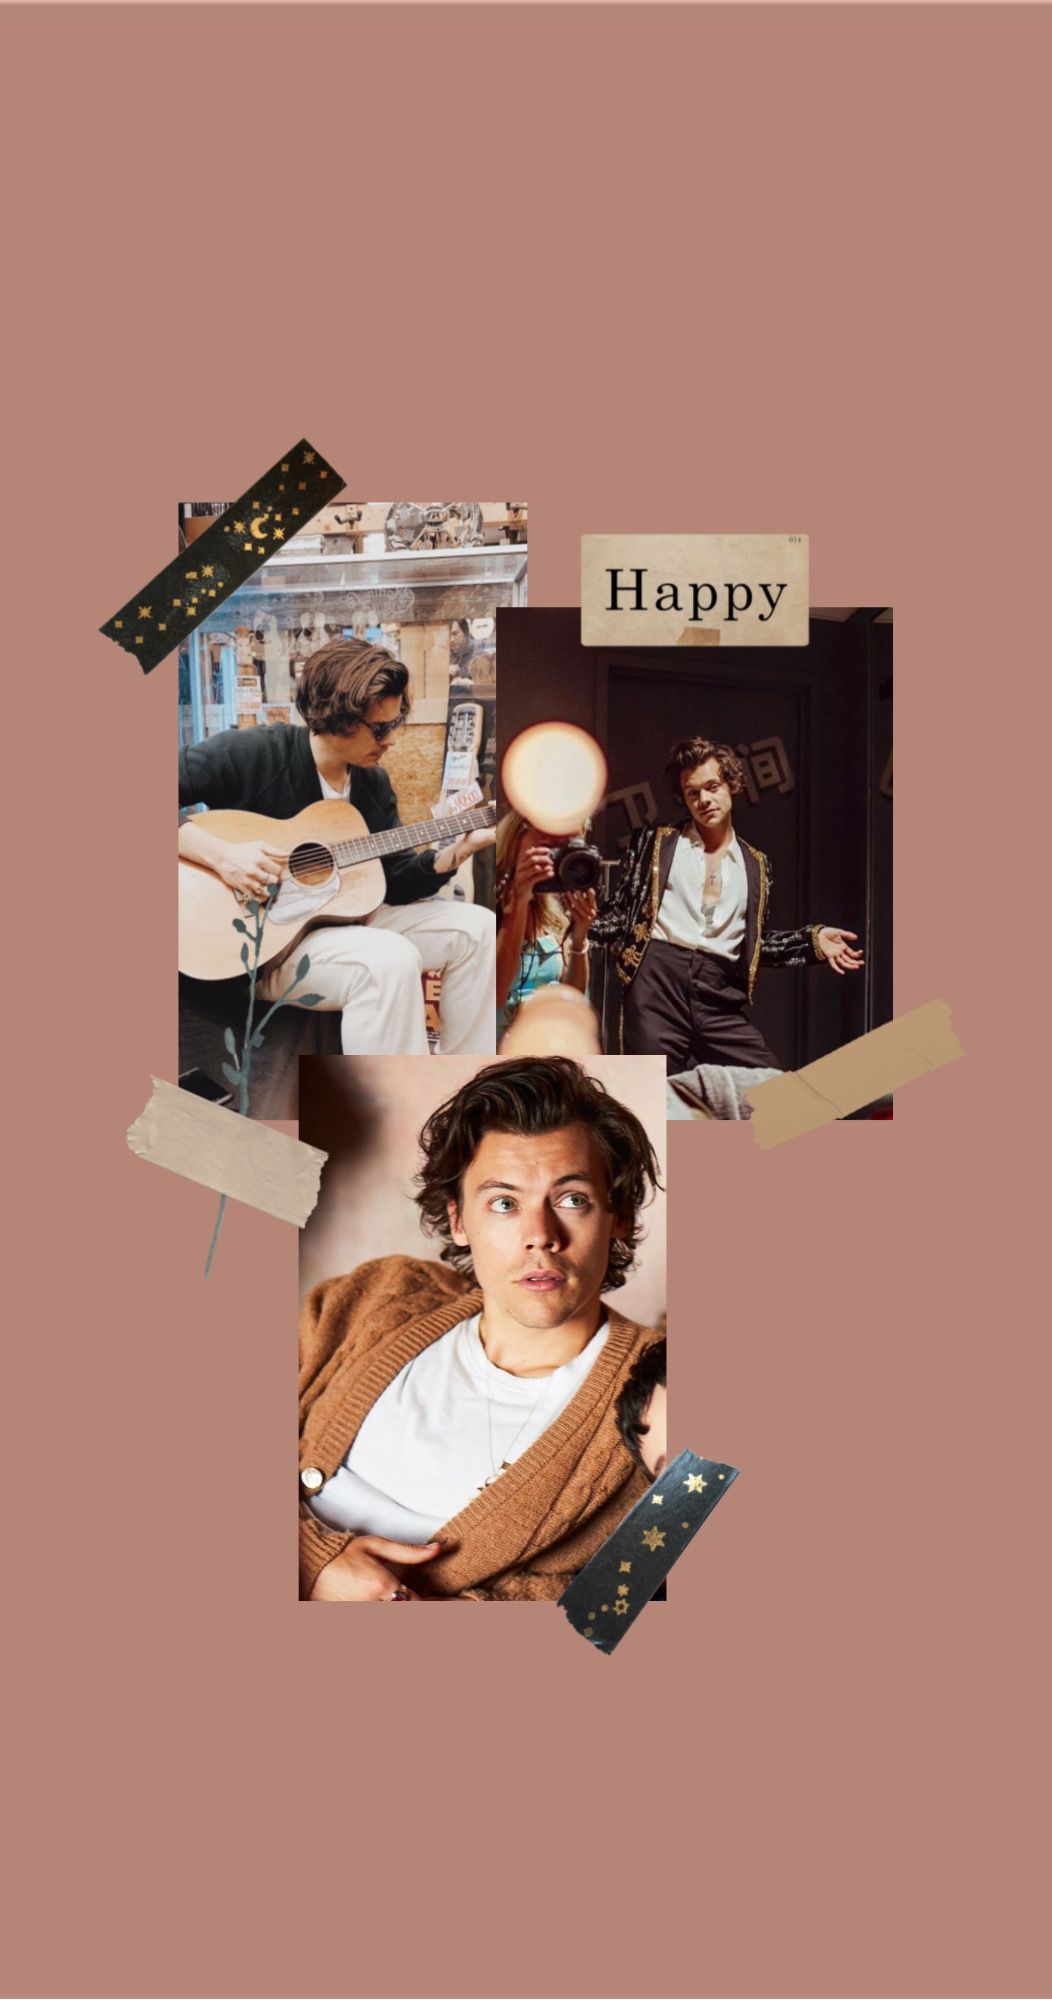 Harry the Brown Haired Boy. Apple watch wallpaper, Brown aesthetic, Watch wallpaper